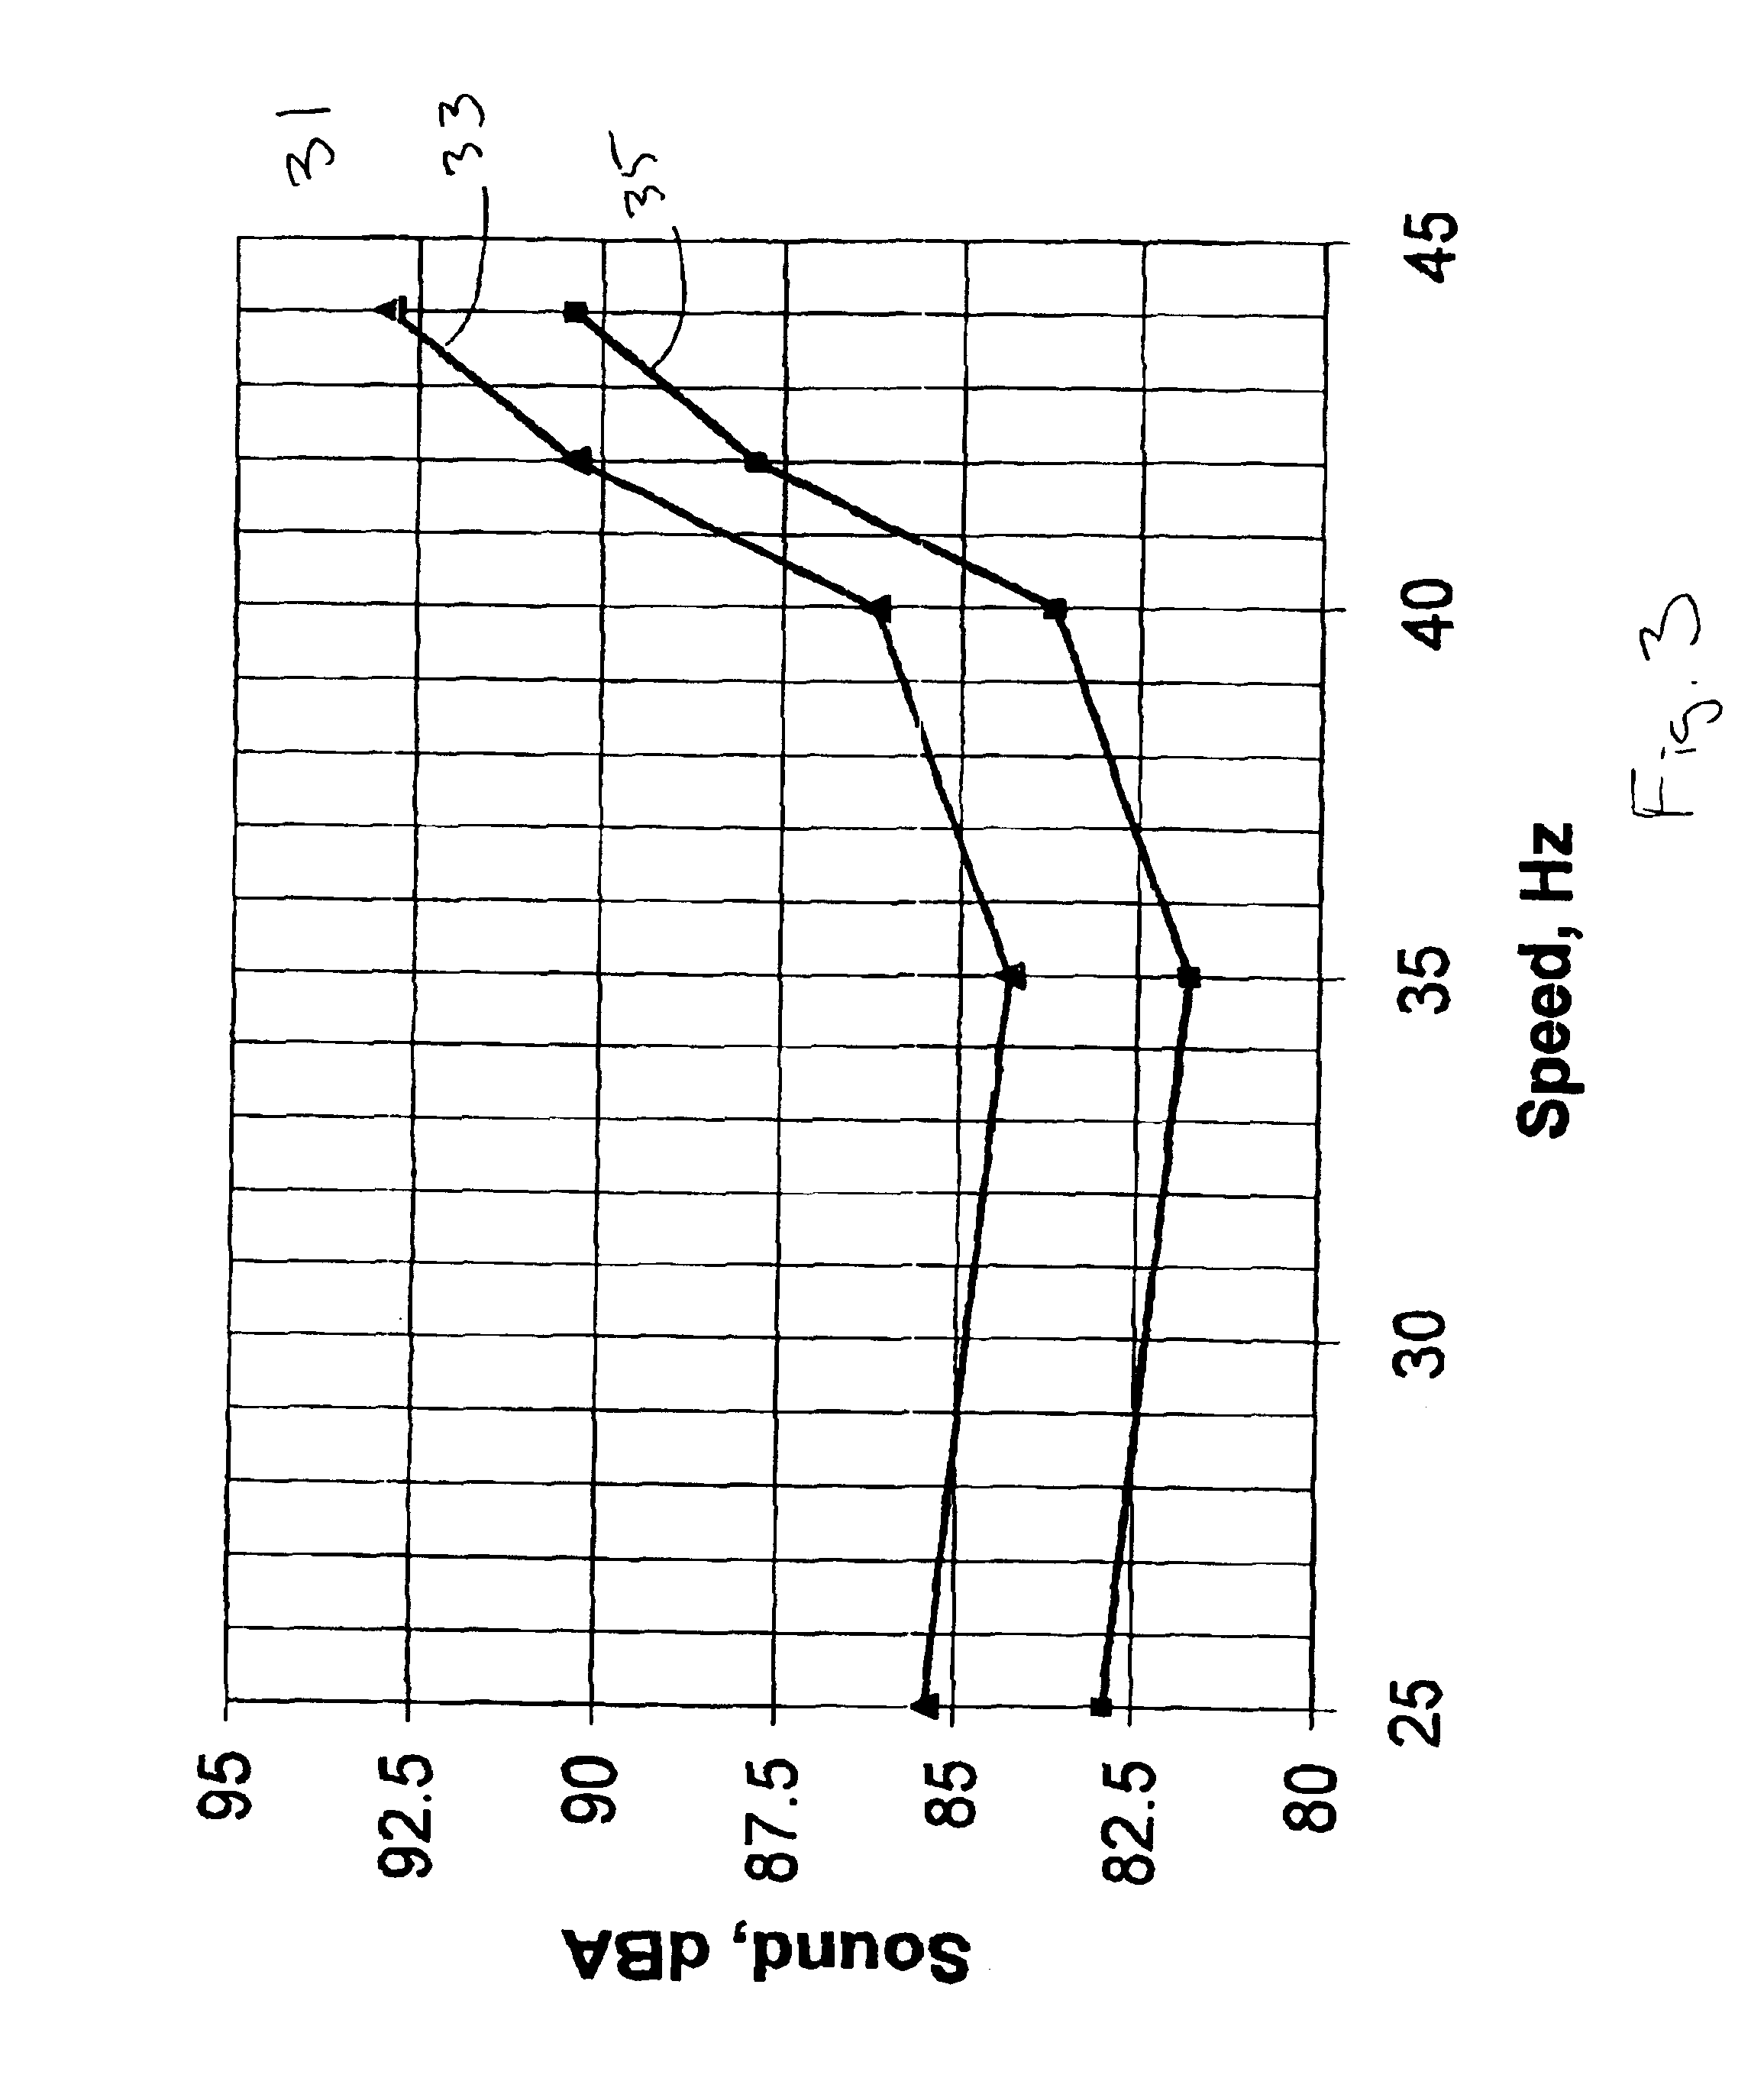 Sound jacket for noise reduction in refrigeration apparatus